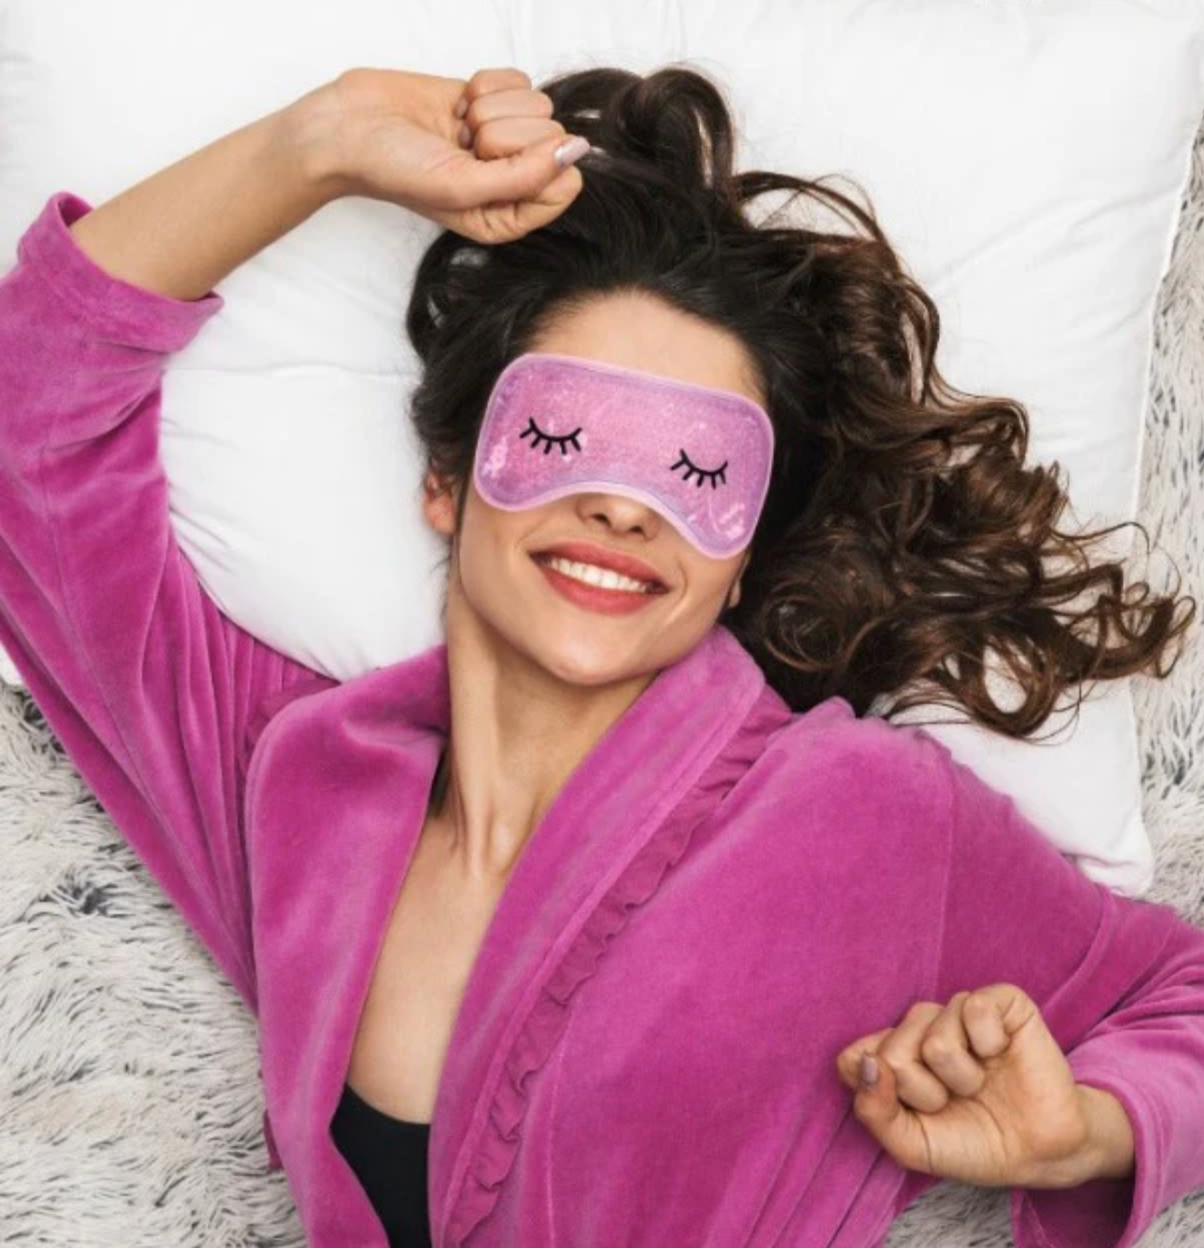 If Looks Could Chill Hot & Cold Gel Eye Mask